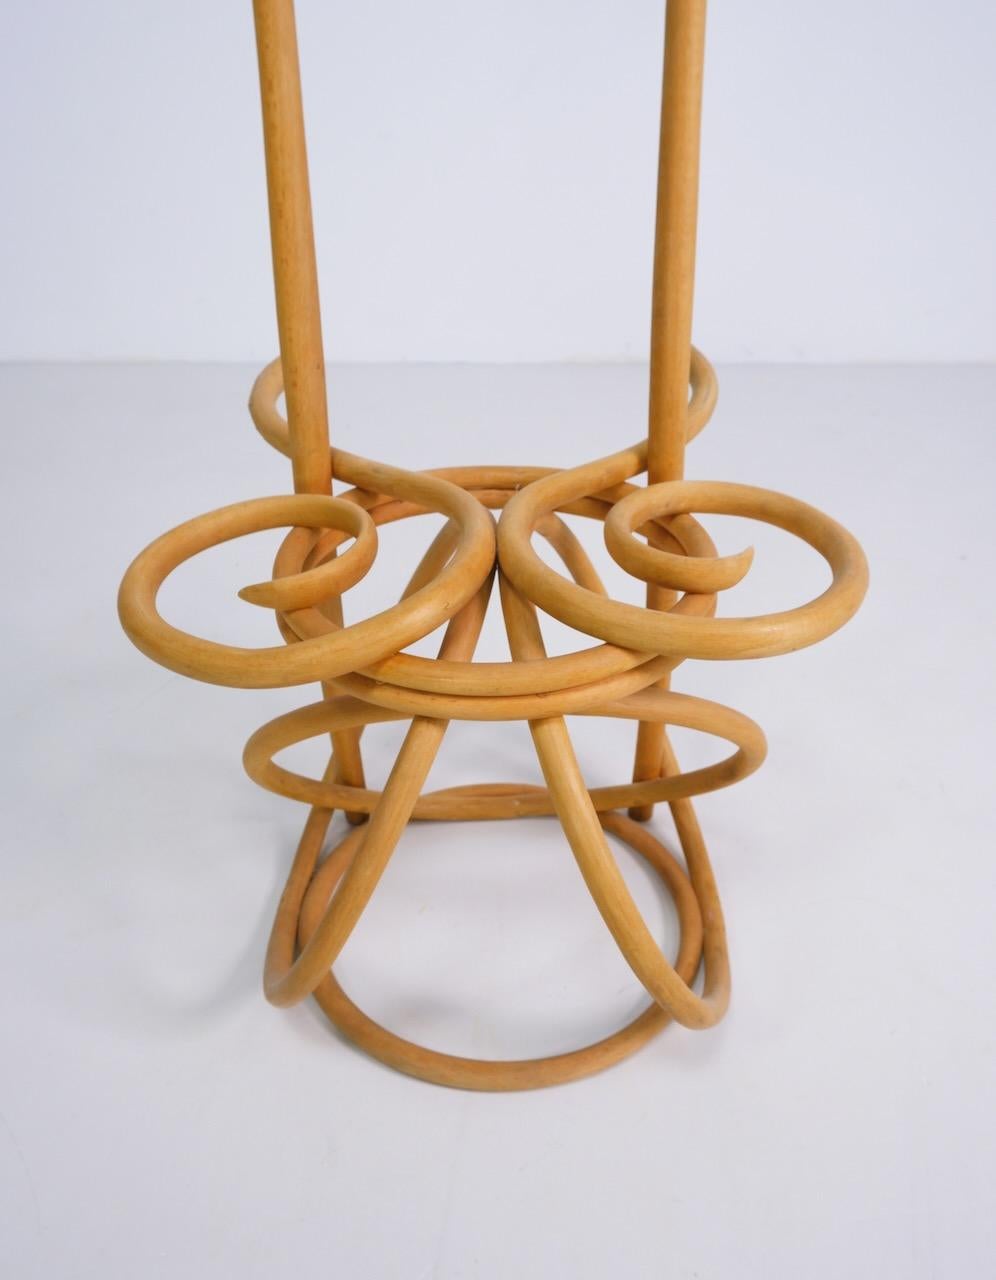 Contemporary Bentwood 'Chair of the Rings' Chair by Martino Gamper for Thonet / Conran For Sale